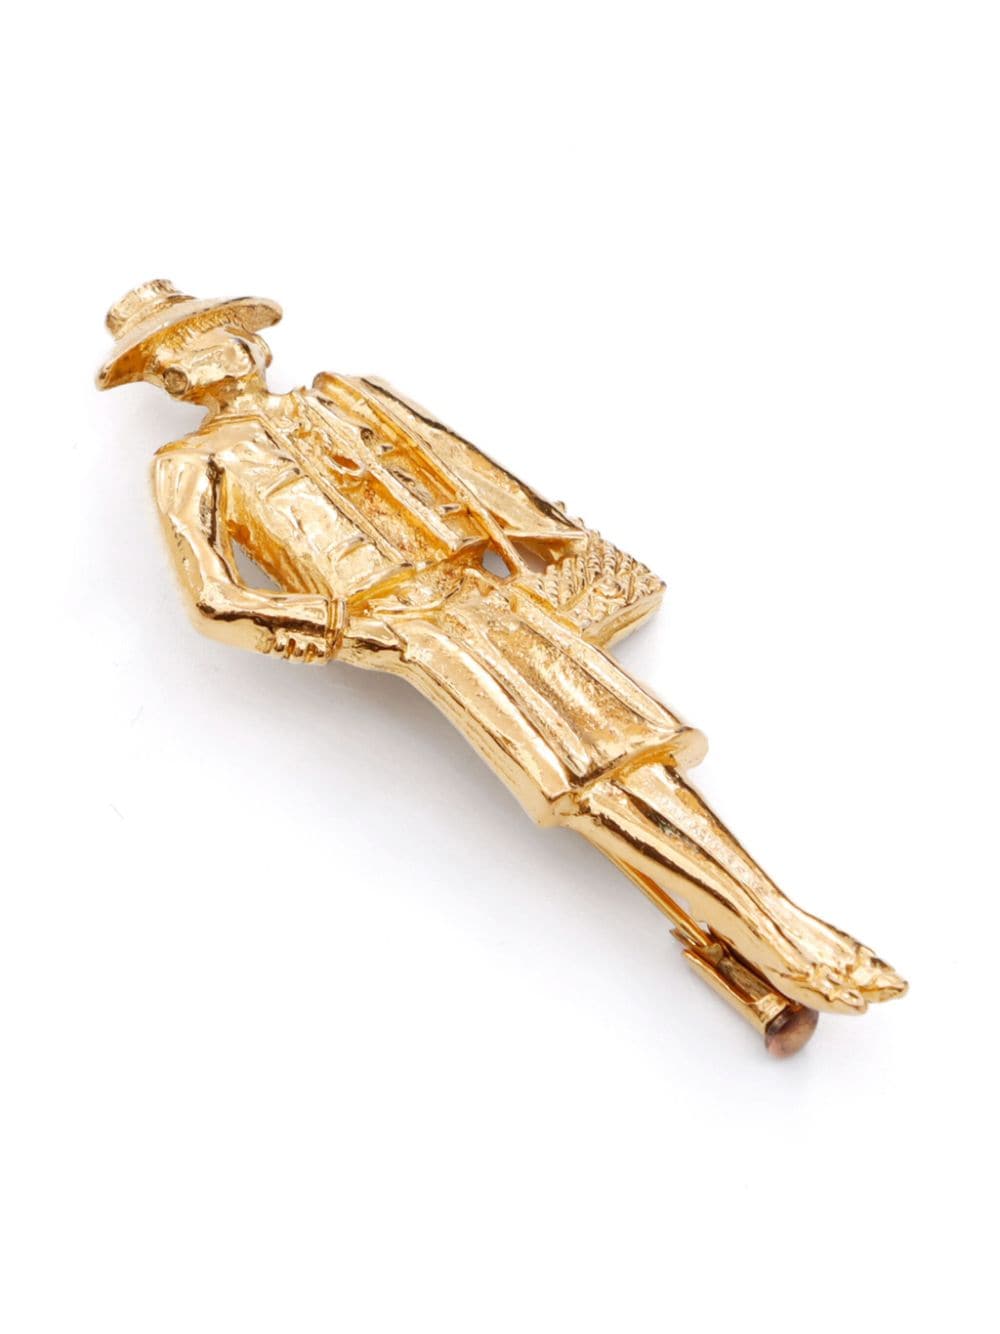 CHANEL Pre-Owned 1981-1985 Mademoiselle broche - Goud